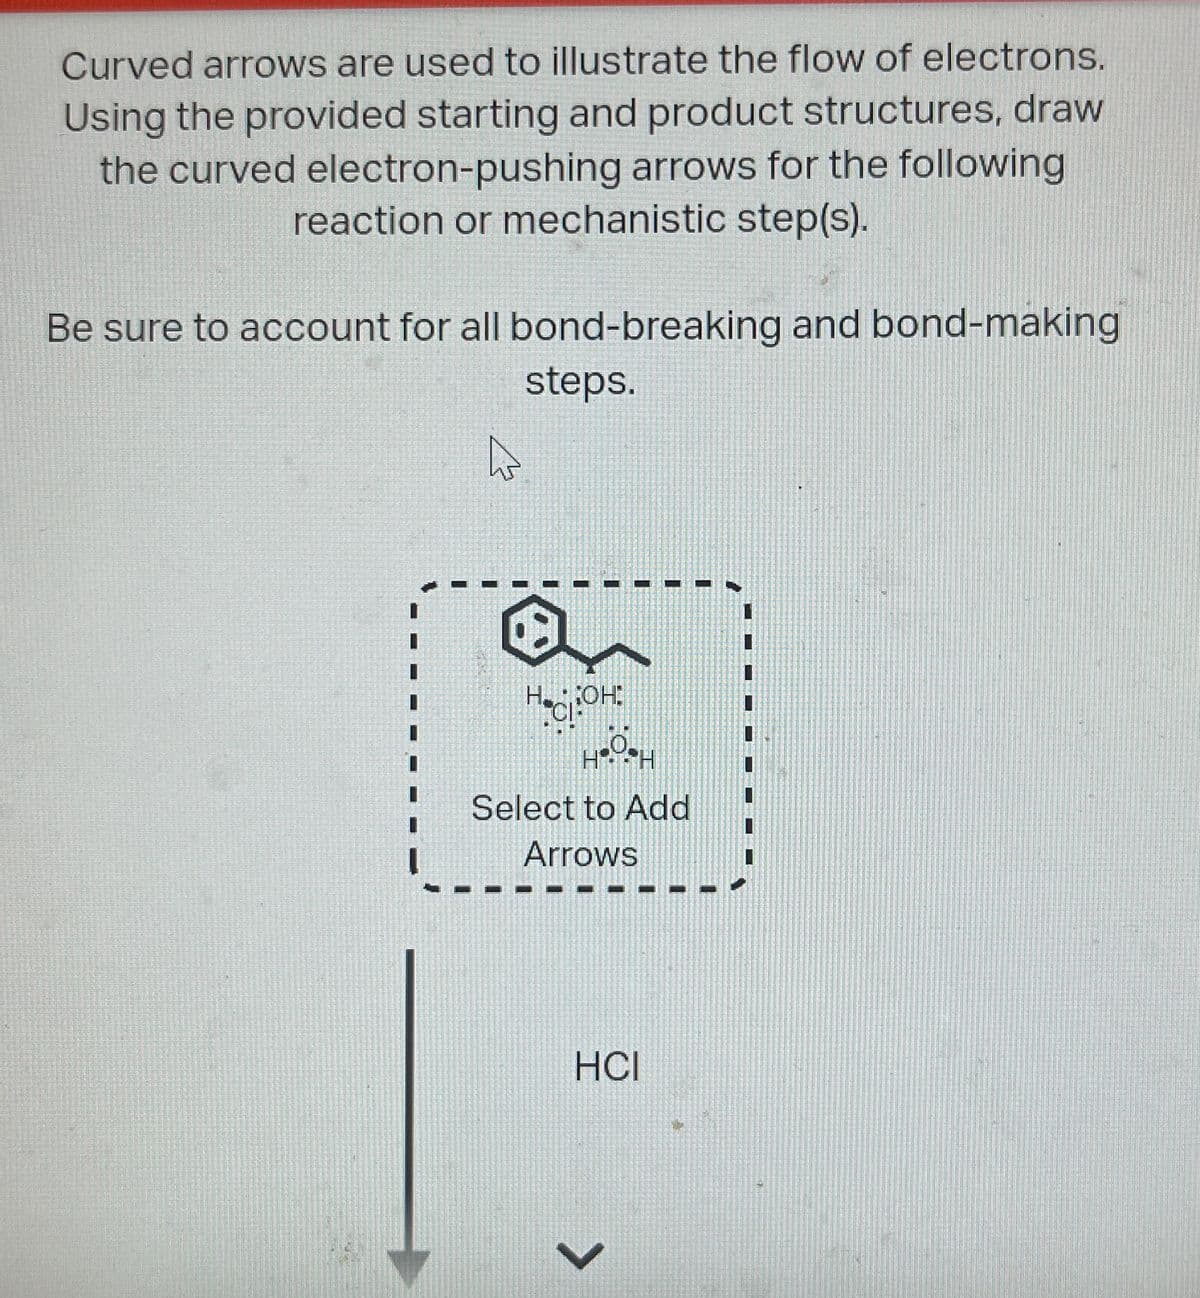 Curved arrows are used to illustrate the flow of electrons.
Using the provided starting and product structures, draw
the curved electron-pushing arrows for the following
reaction or mechanistic step(s).
Be sure to account for all bond-breaking and bond-making
steps.
HOH
Select to Add
Arrows
HCI
>